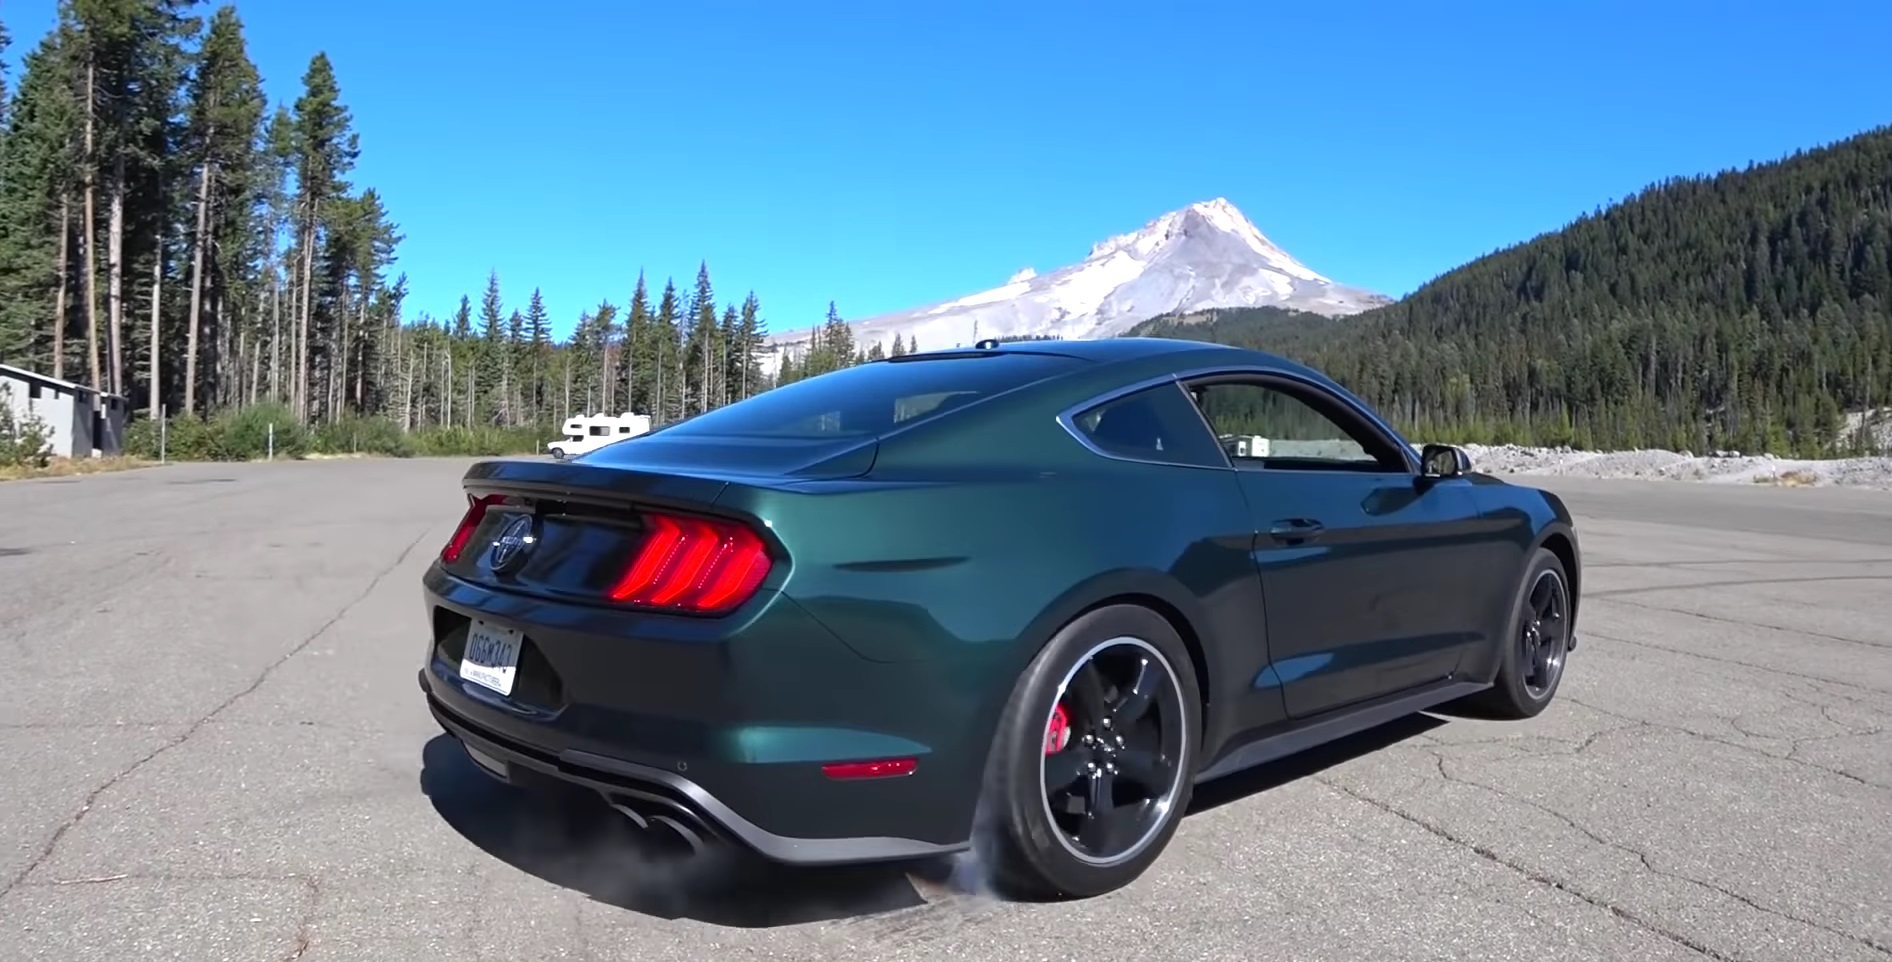 Video: 2019 Ford Mustang Bullitt – Is This The Best Non-Shelby Stang?